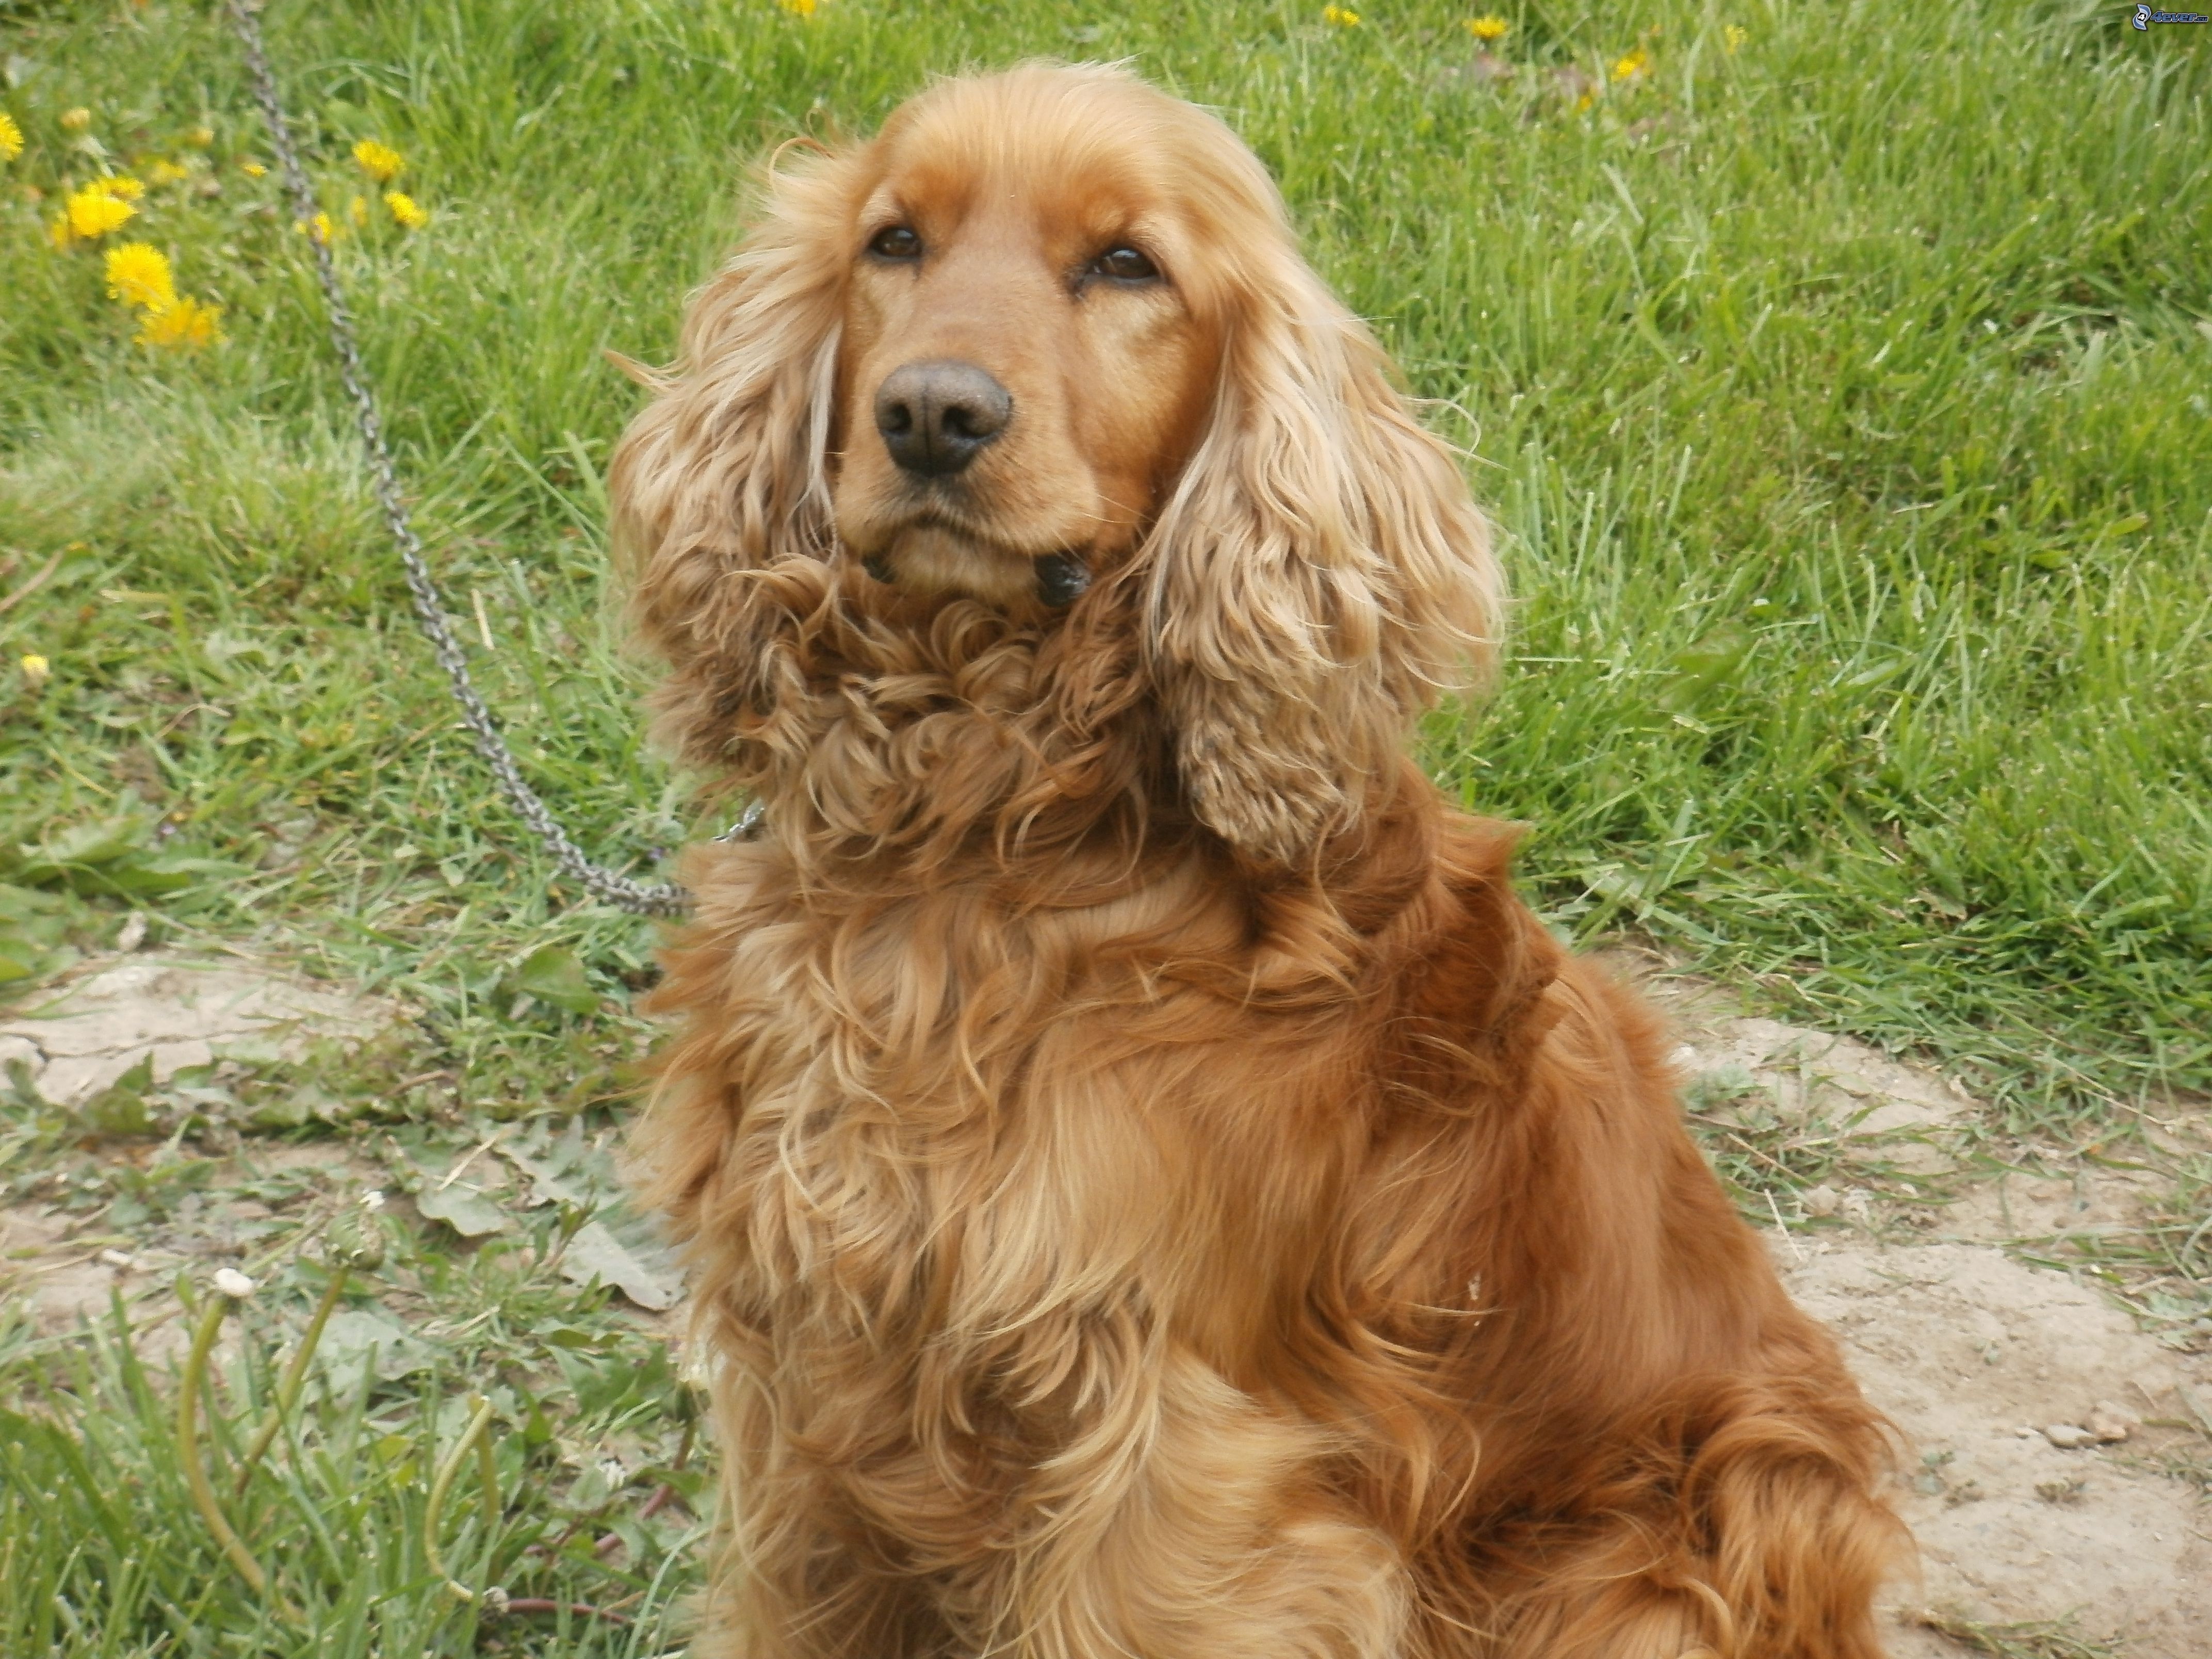 English Cocker Spaniel - Dog Breed history and some interesting facts